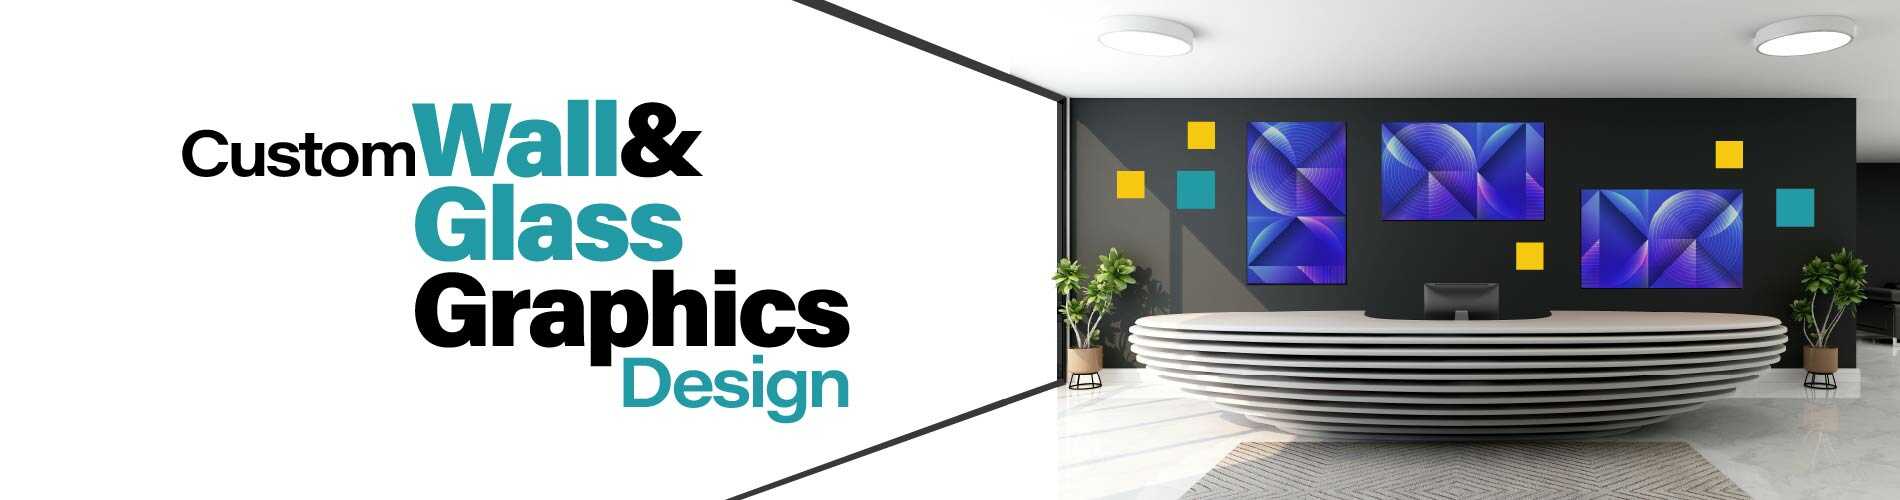 wall-graphics-design--home-and-commercial